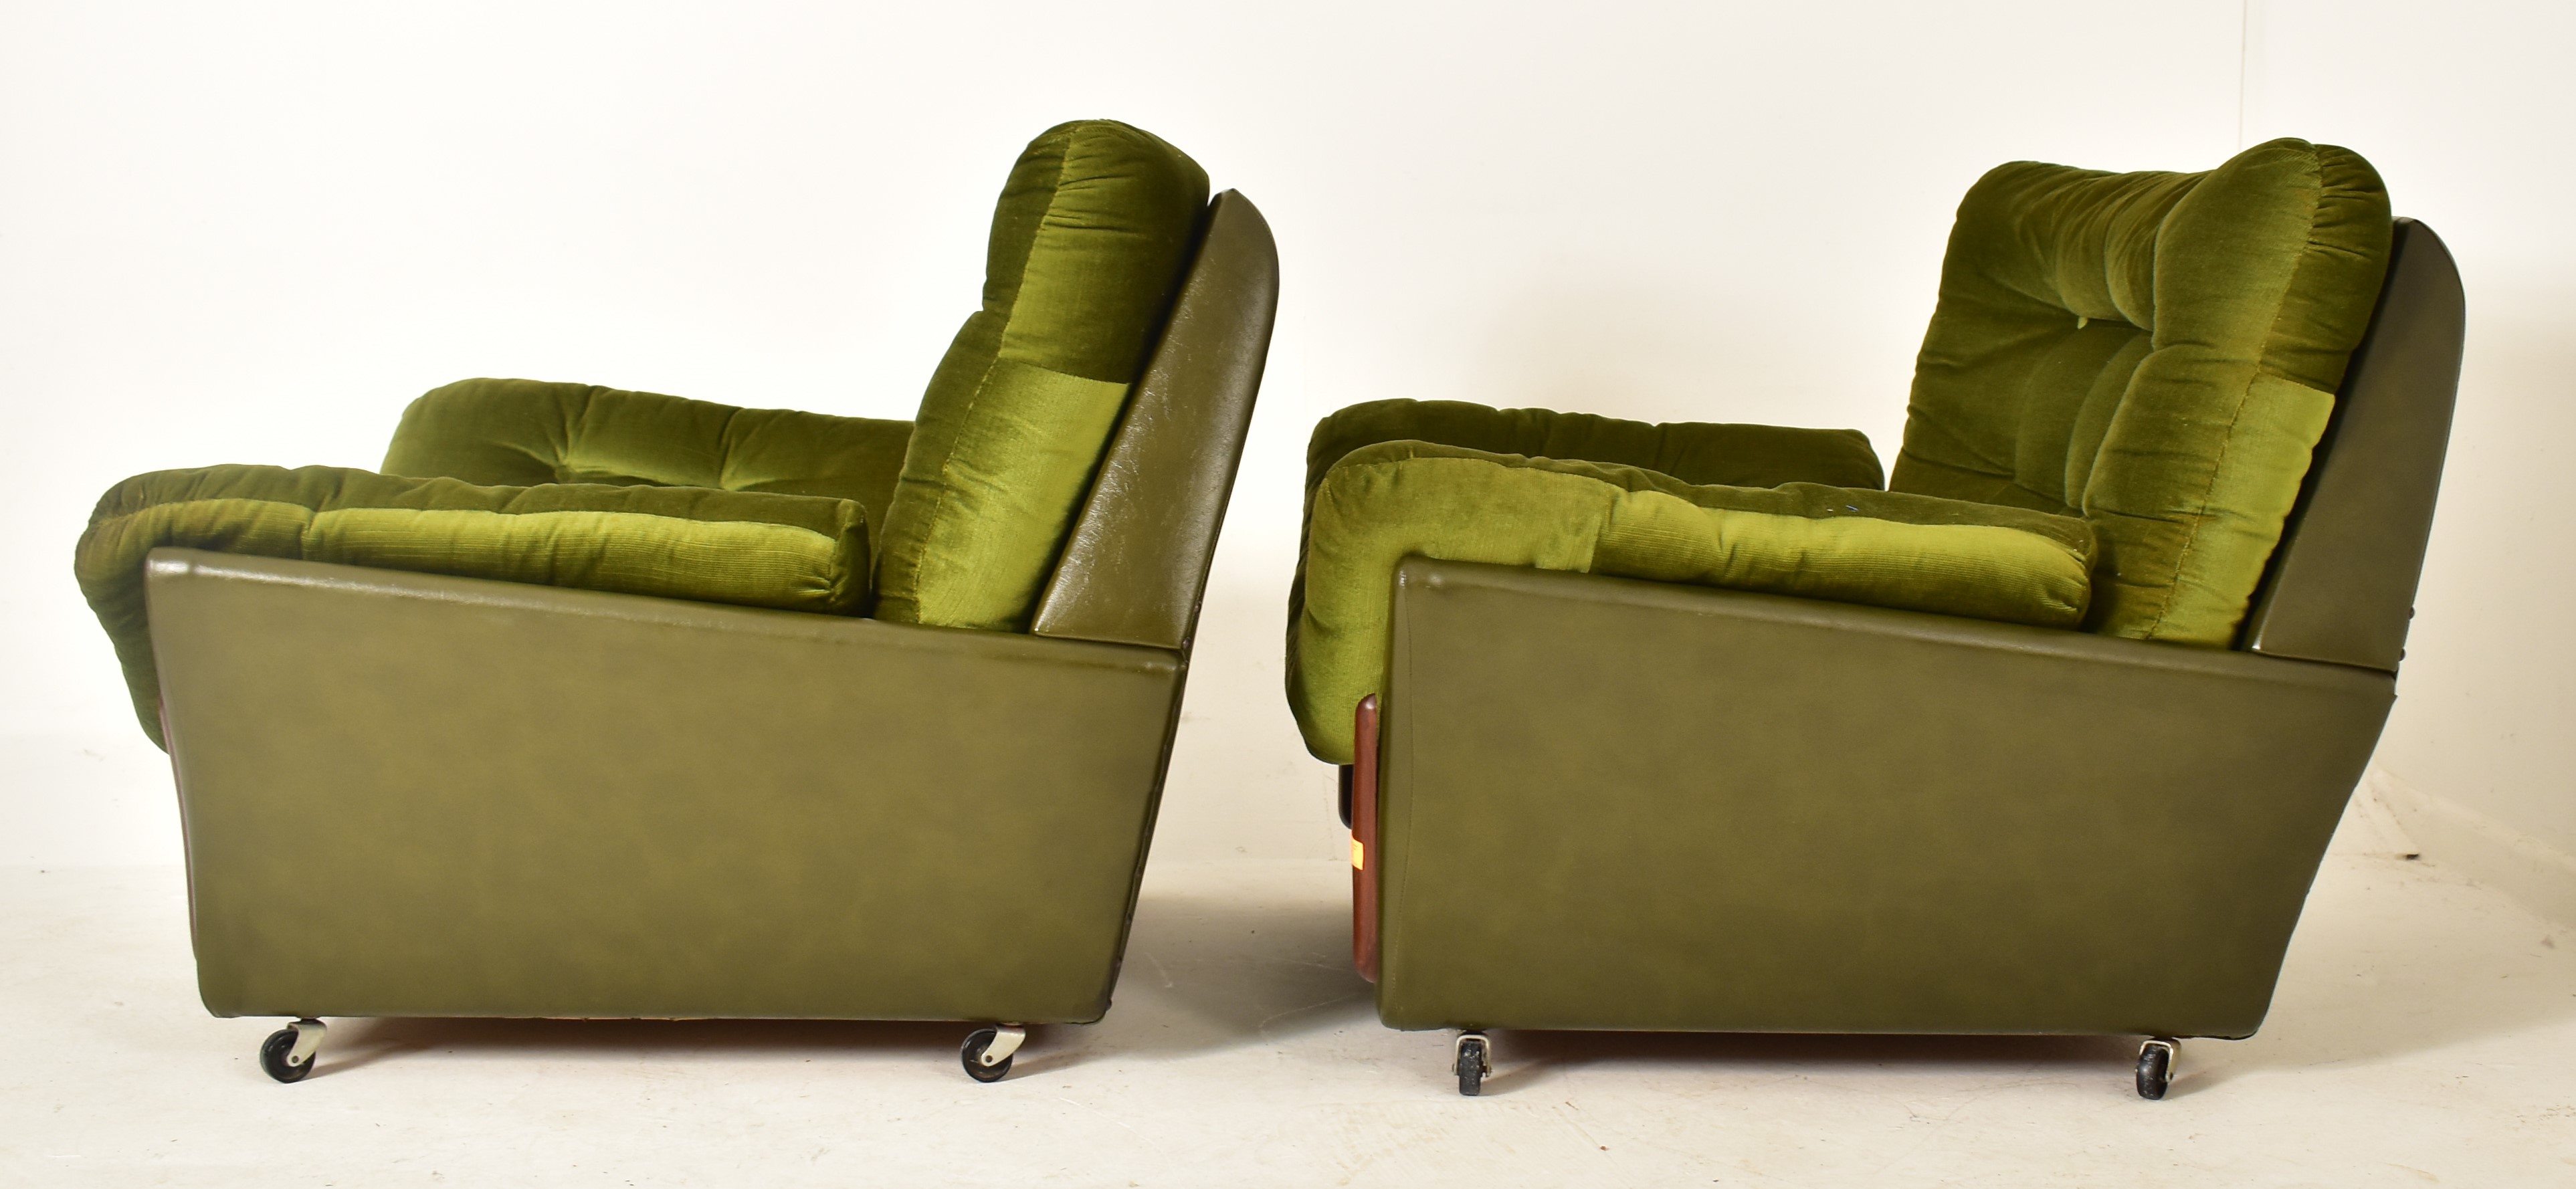 DYKES FURNITURE - PAIR OF MID CENTURY SCOTTISH ARMCHAIRS - Image 2 of 5